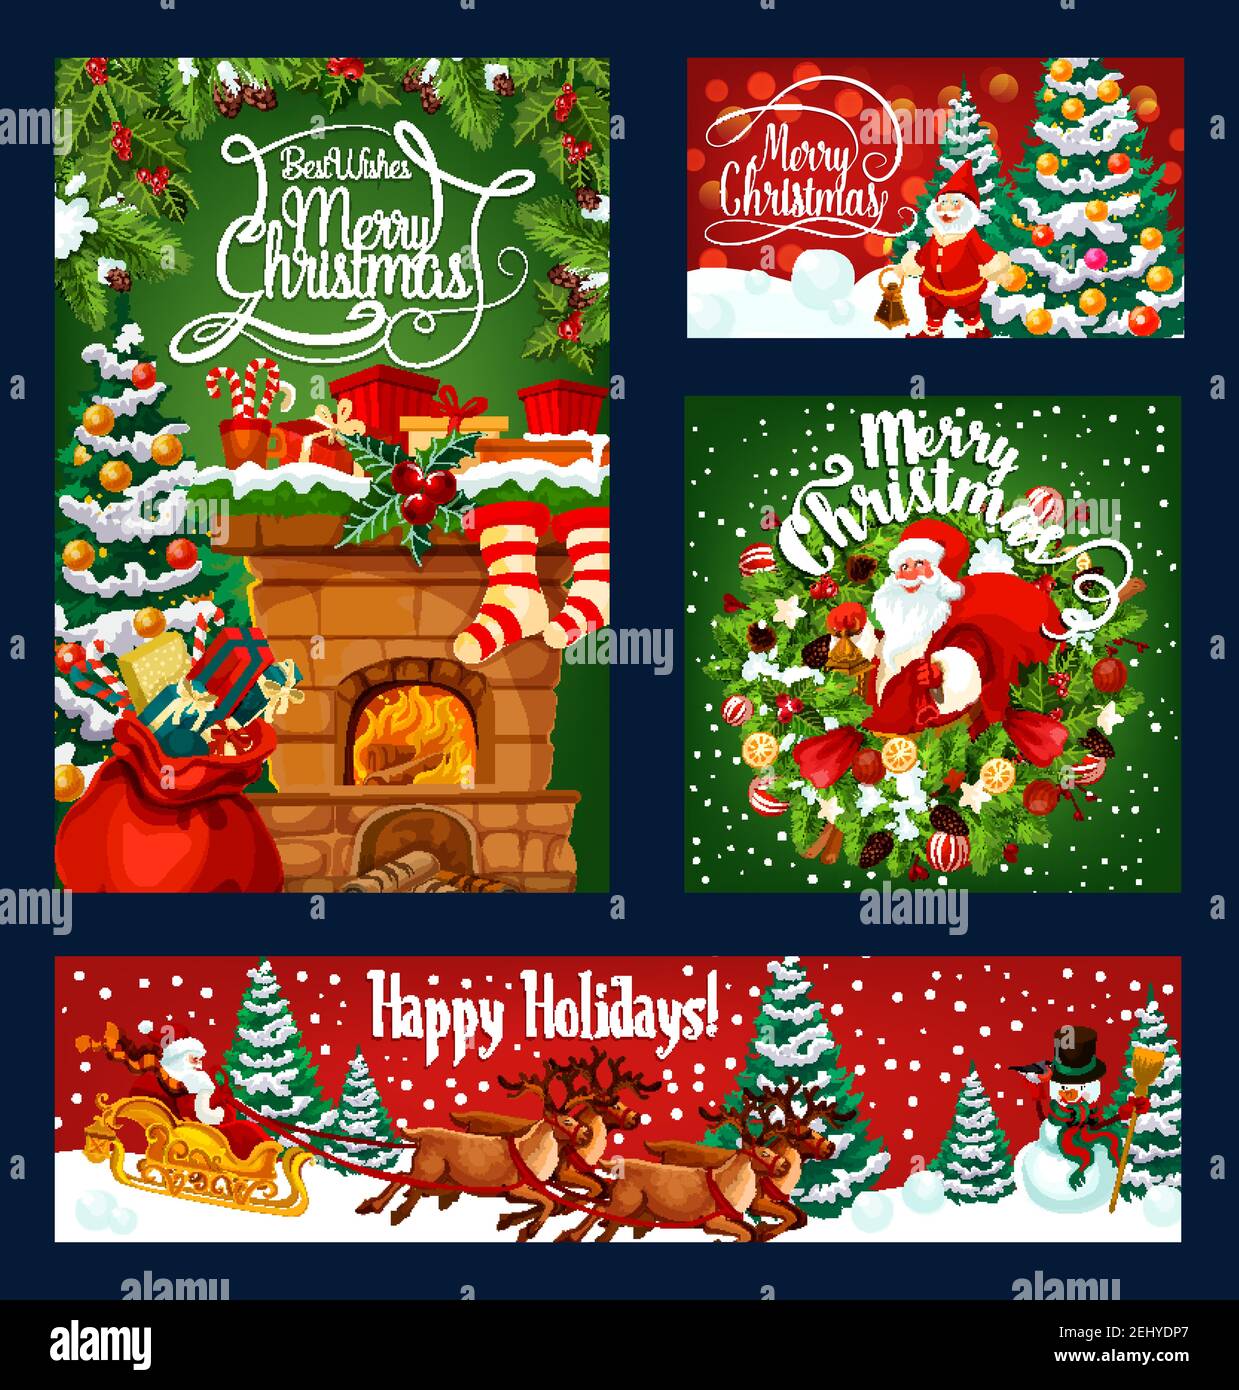 Merry Christmas greeting template on red and green snow background. Vector Xmas pine tree, balls and bell, snowman and gift stockings on fireplace chi Stock Vector